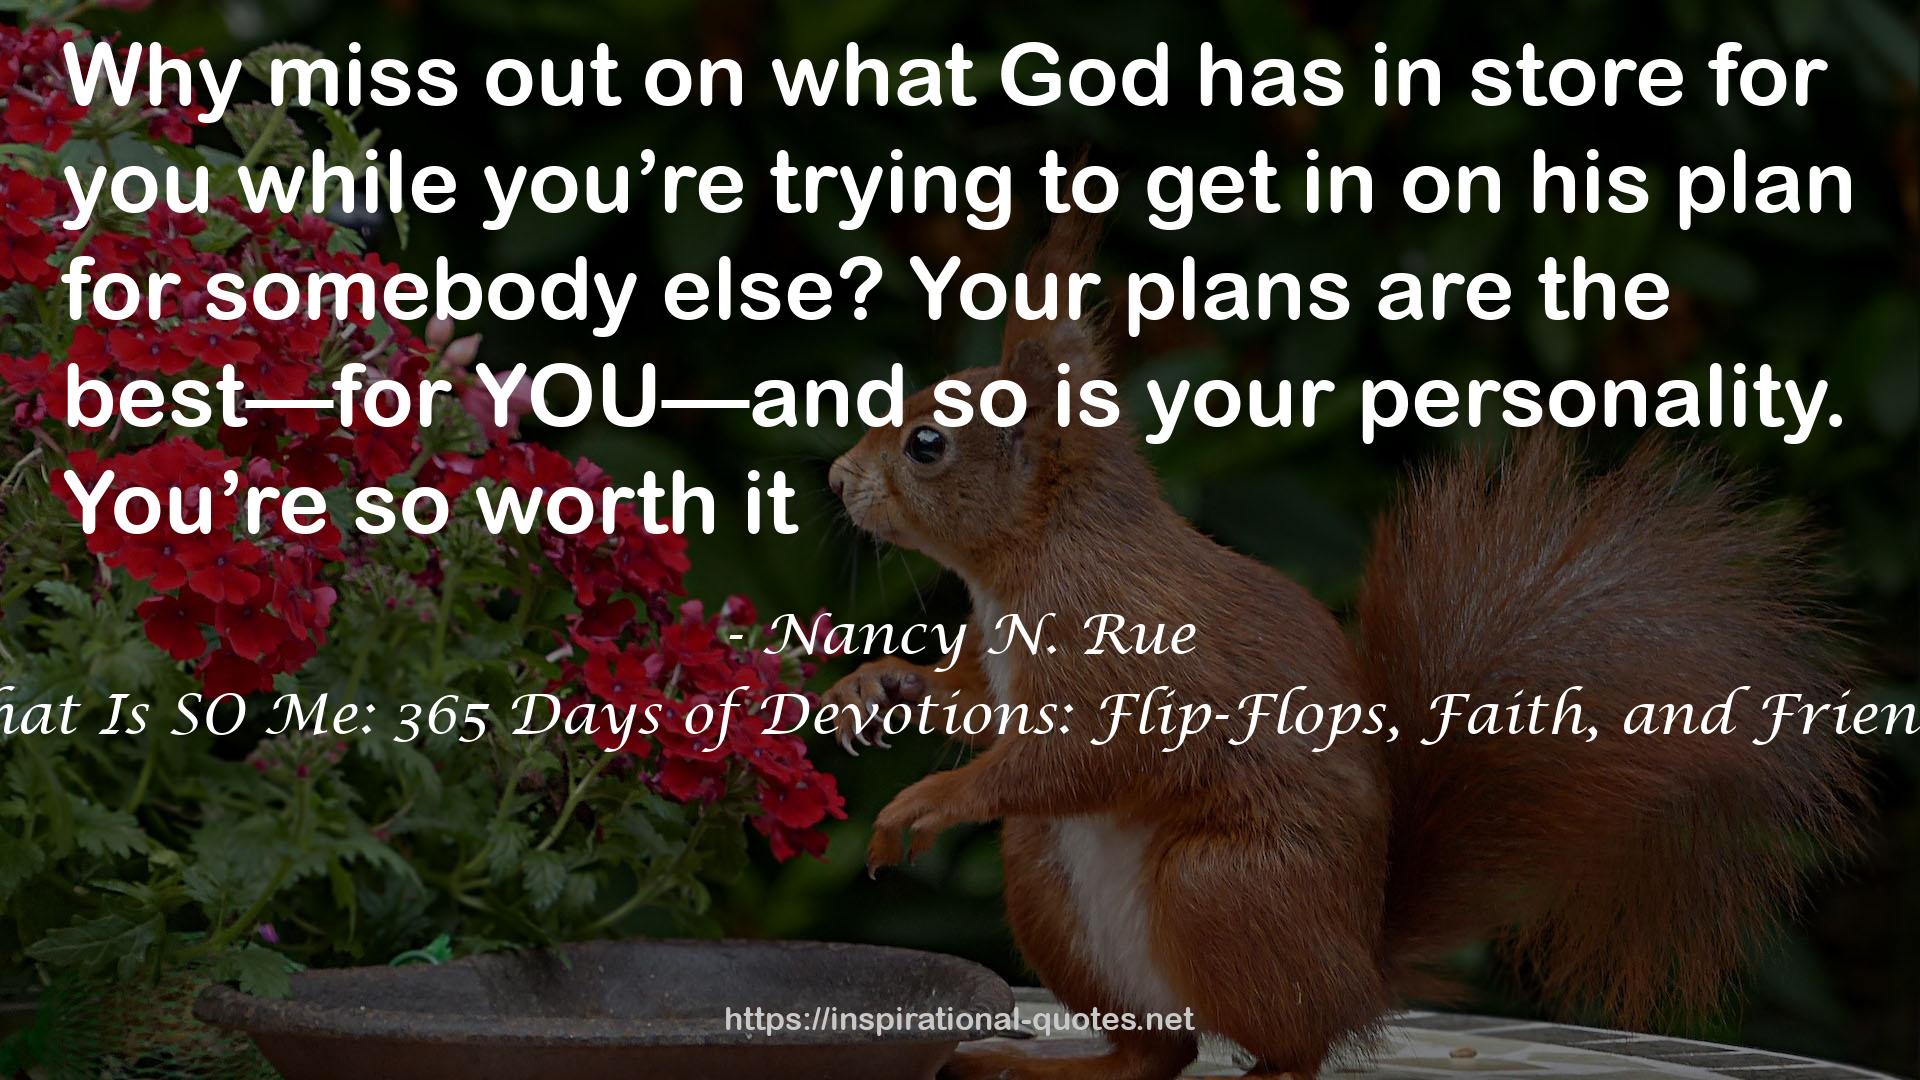 That Is SO Me: 365 Days of Devotions: Flip-Flops, Faith, and Friends QUOTES